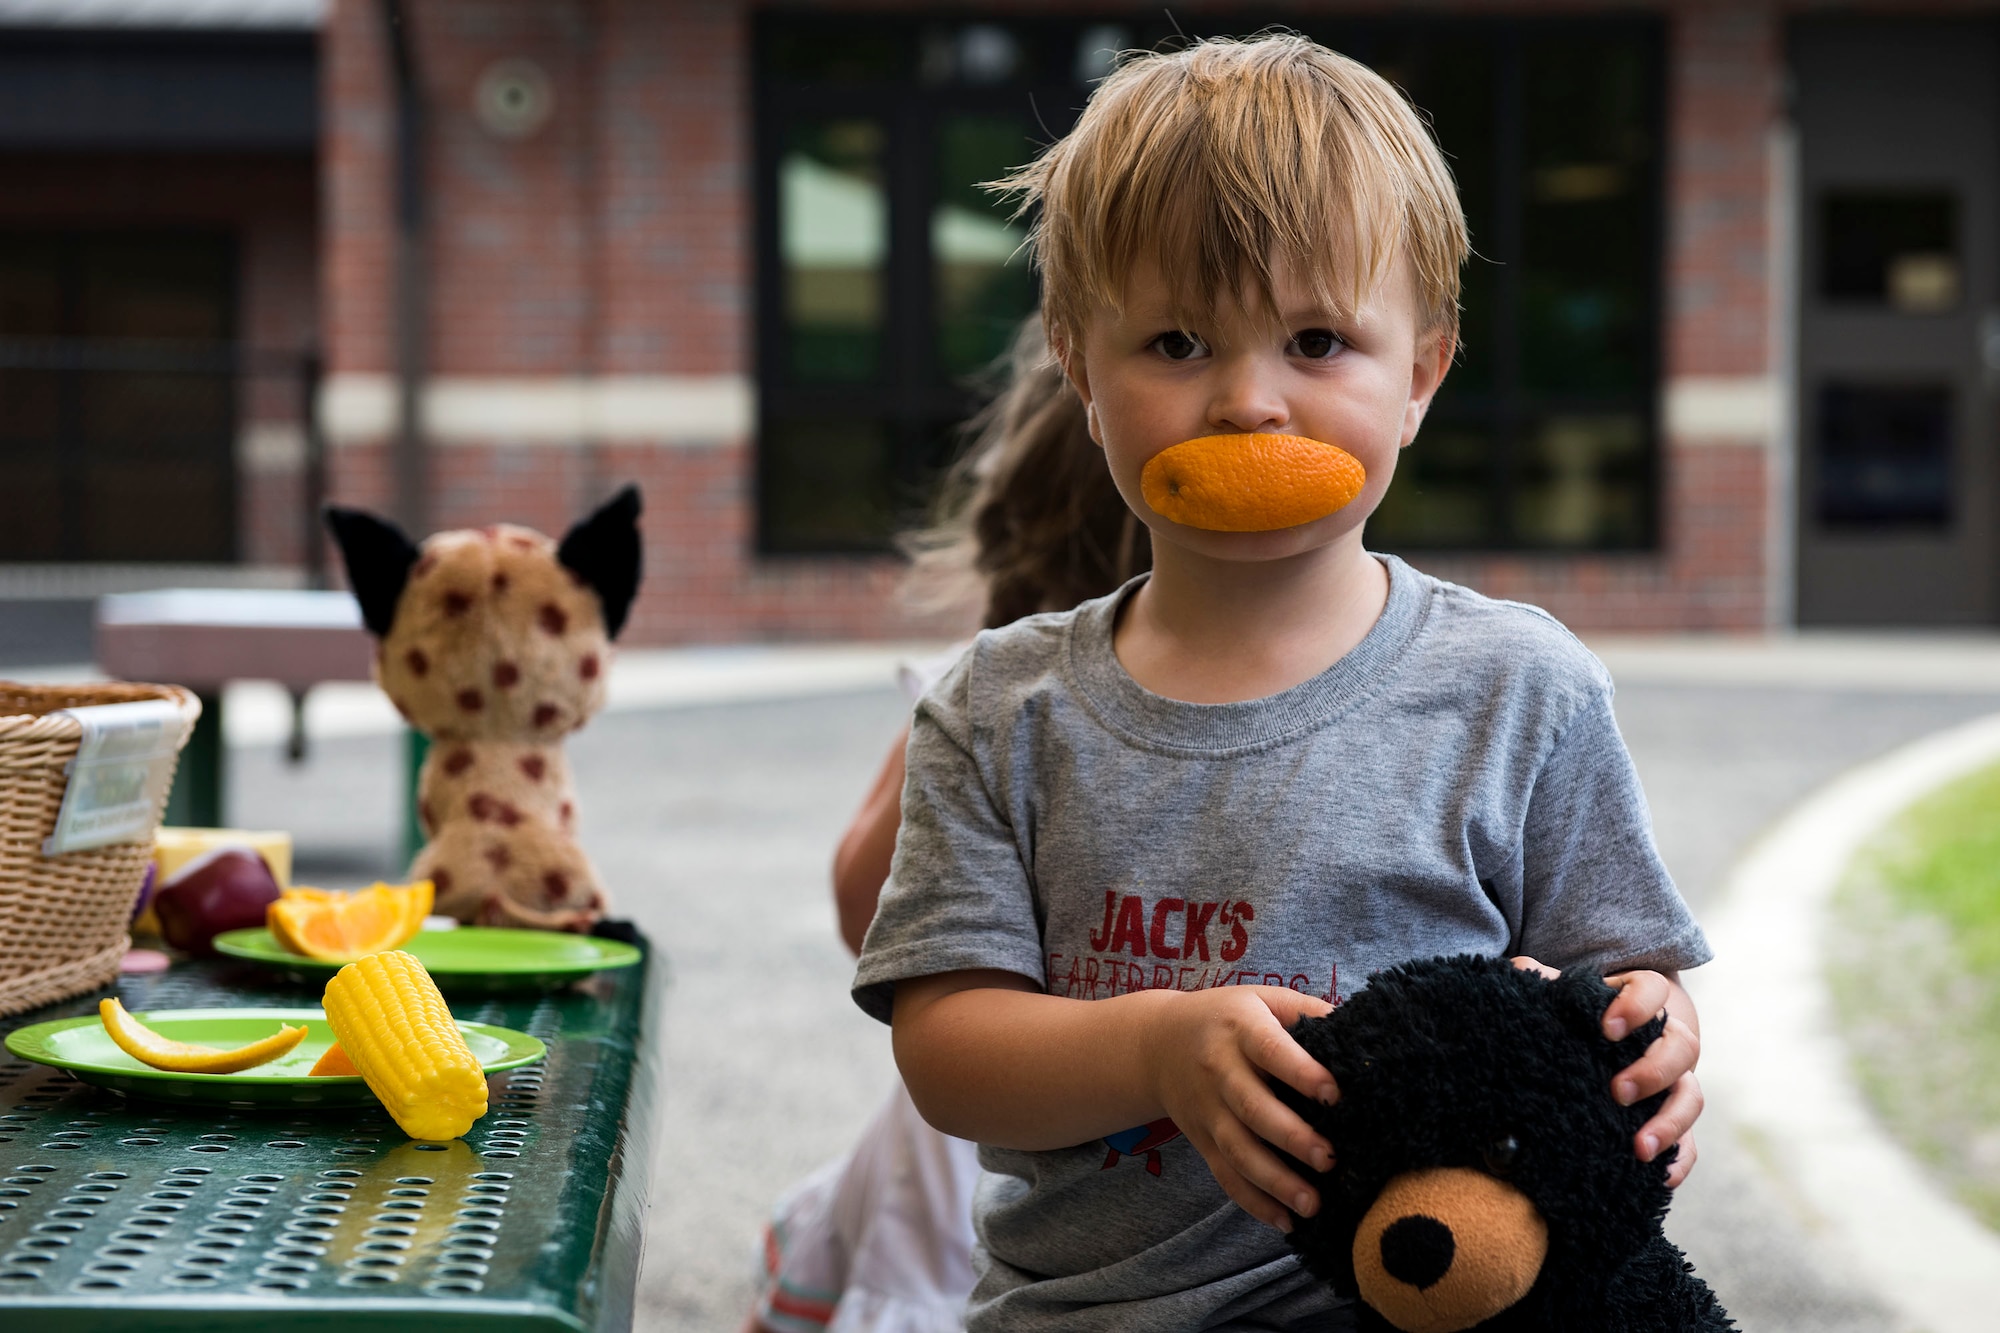 A child poses for a photo during the Teddy Bear Picnic, April 26, 2019, at Moody Air Force Base, Ga. The Child Development Center hosted the event in support of the Month of the Military Child in April. (U.S. Air Force photo by Senior Airman Erick Requadt)